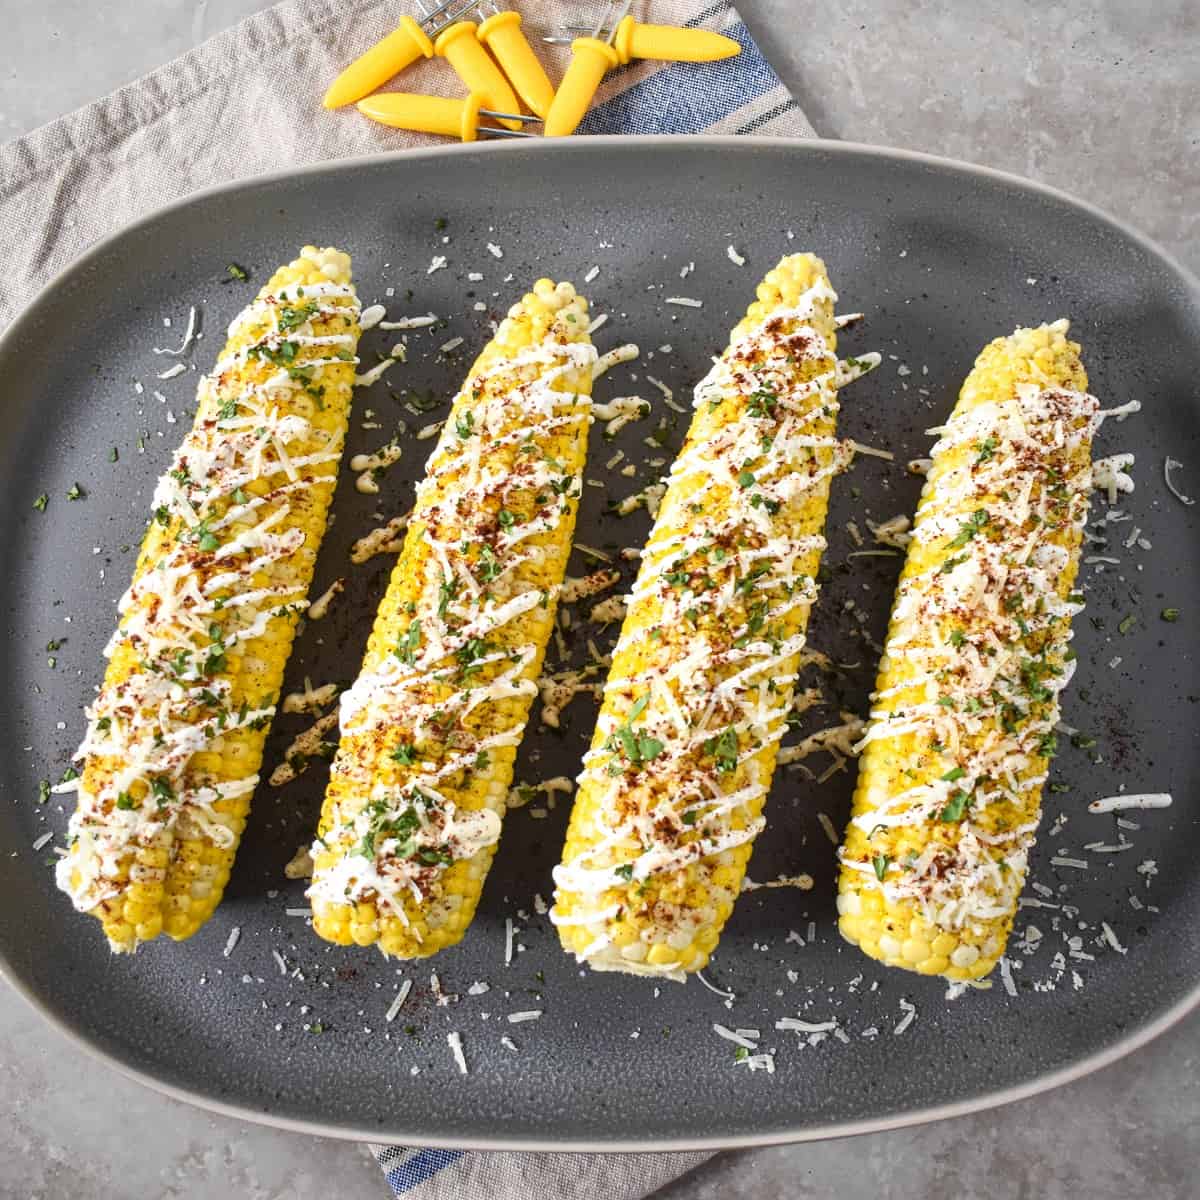 Four corn cobs topped with sour cream, chili powder, parmesan, and cilantro. They are set on a gray platter with yellow corn holders on top.